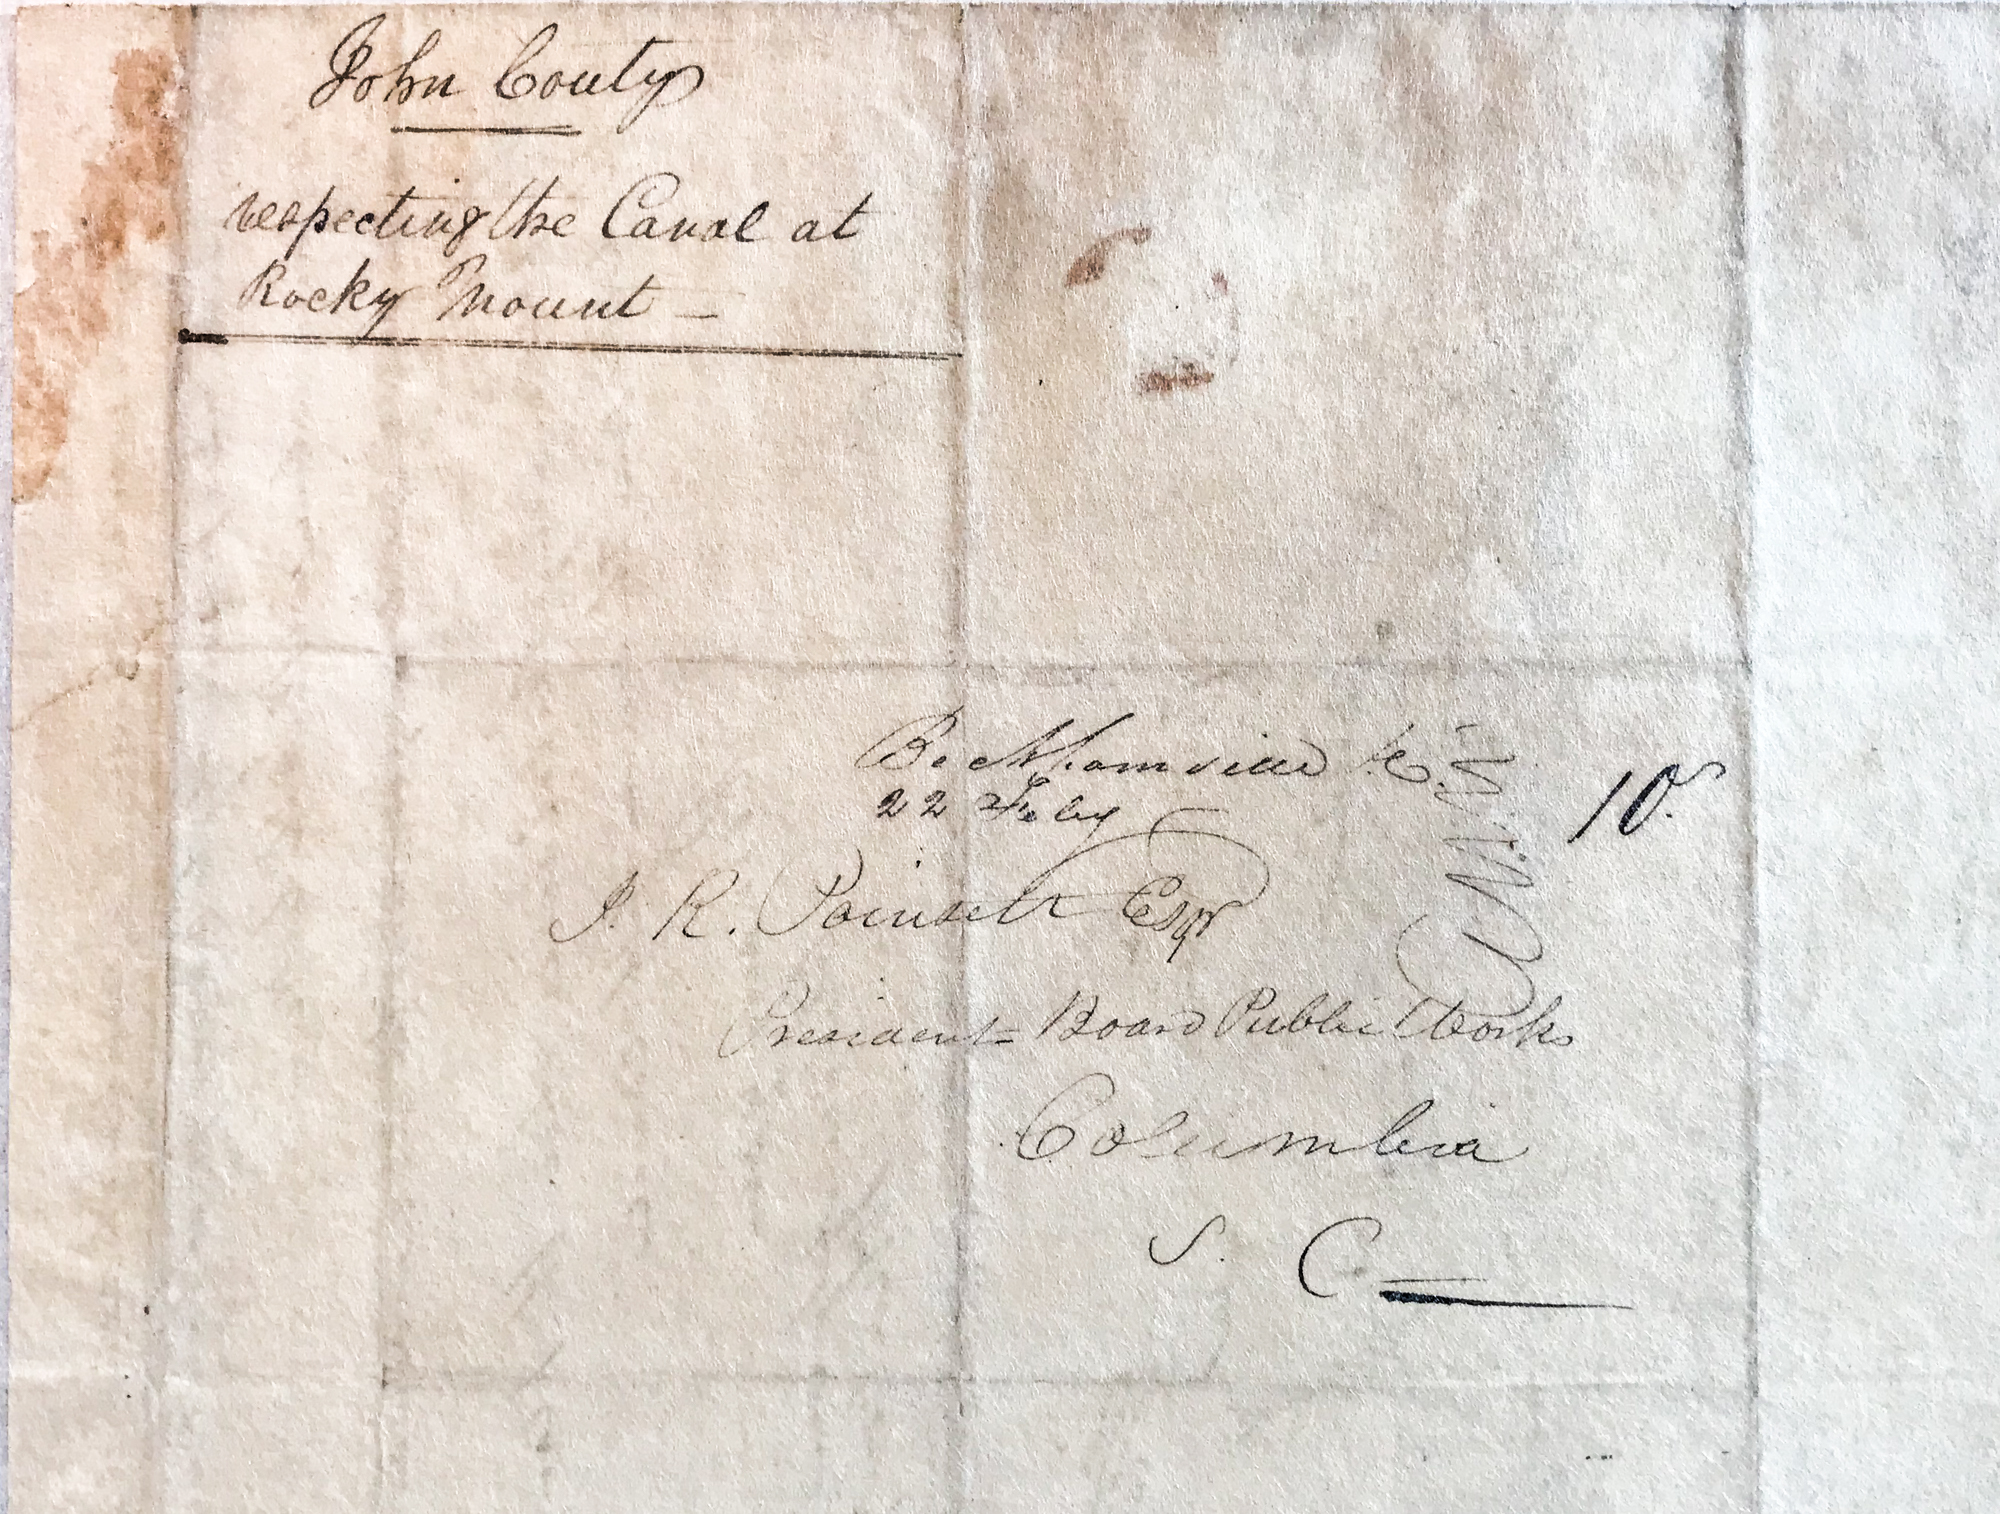 RELATED CORRESPONDENCE FROM THE SC PUBLIC WORKS - JOHN COUTY TO J.R. POINSETT